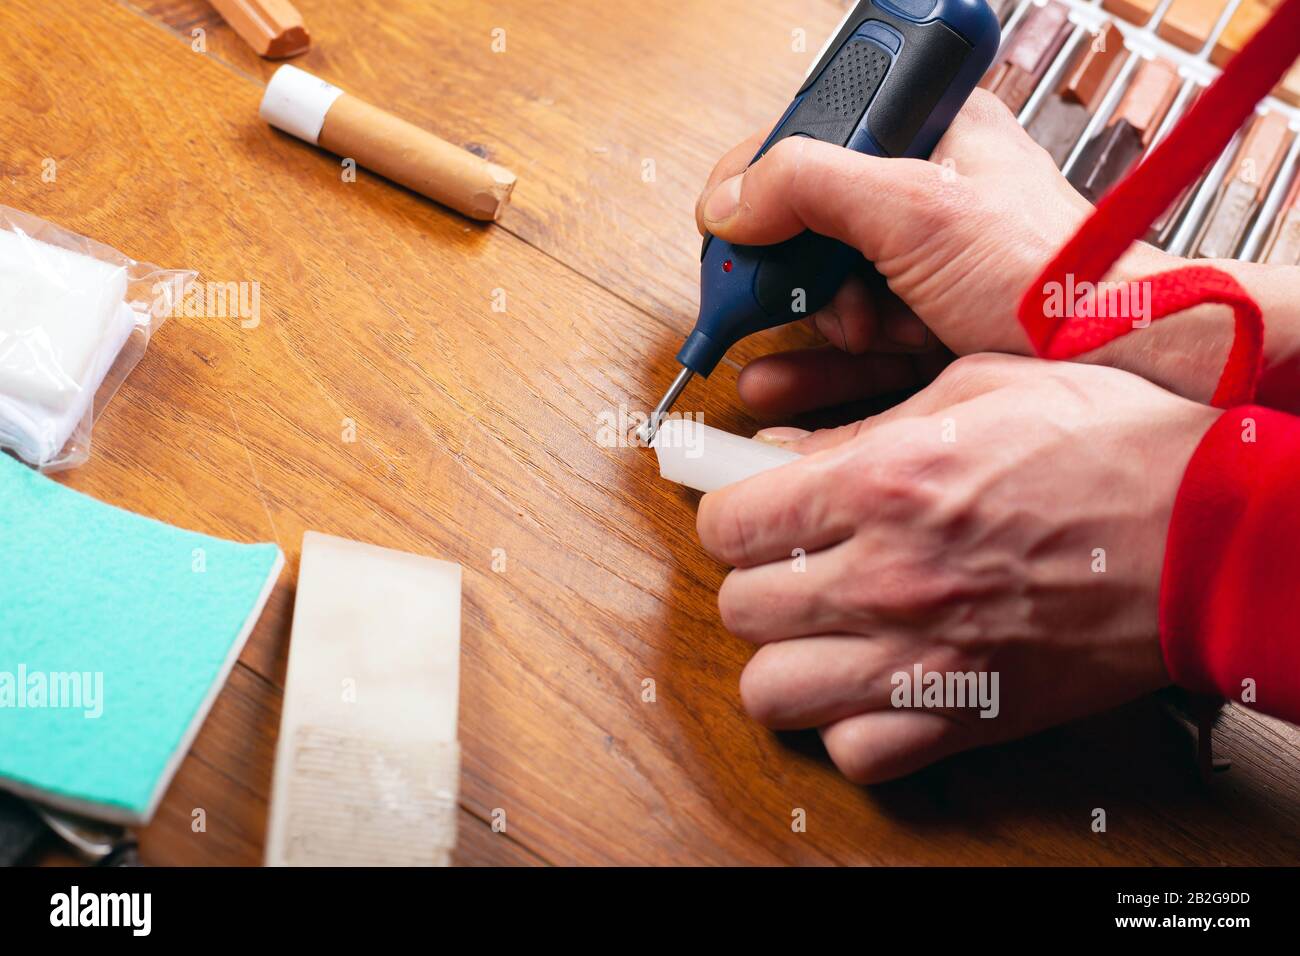 elimination of defects, chips, scratches in the laminate flooring. parquet restoration. Stock Photo